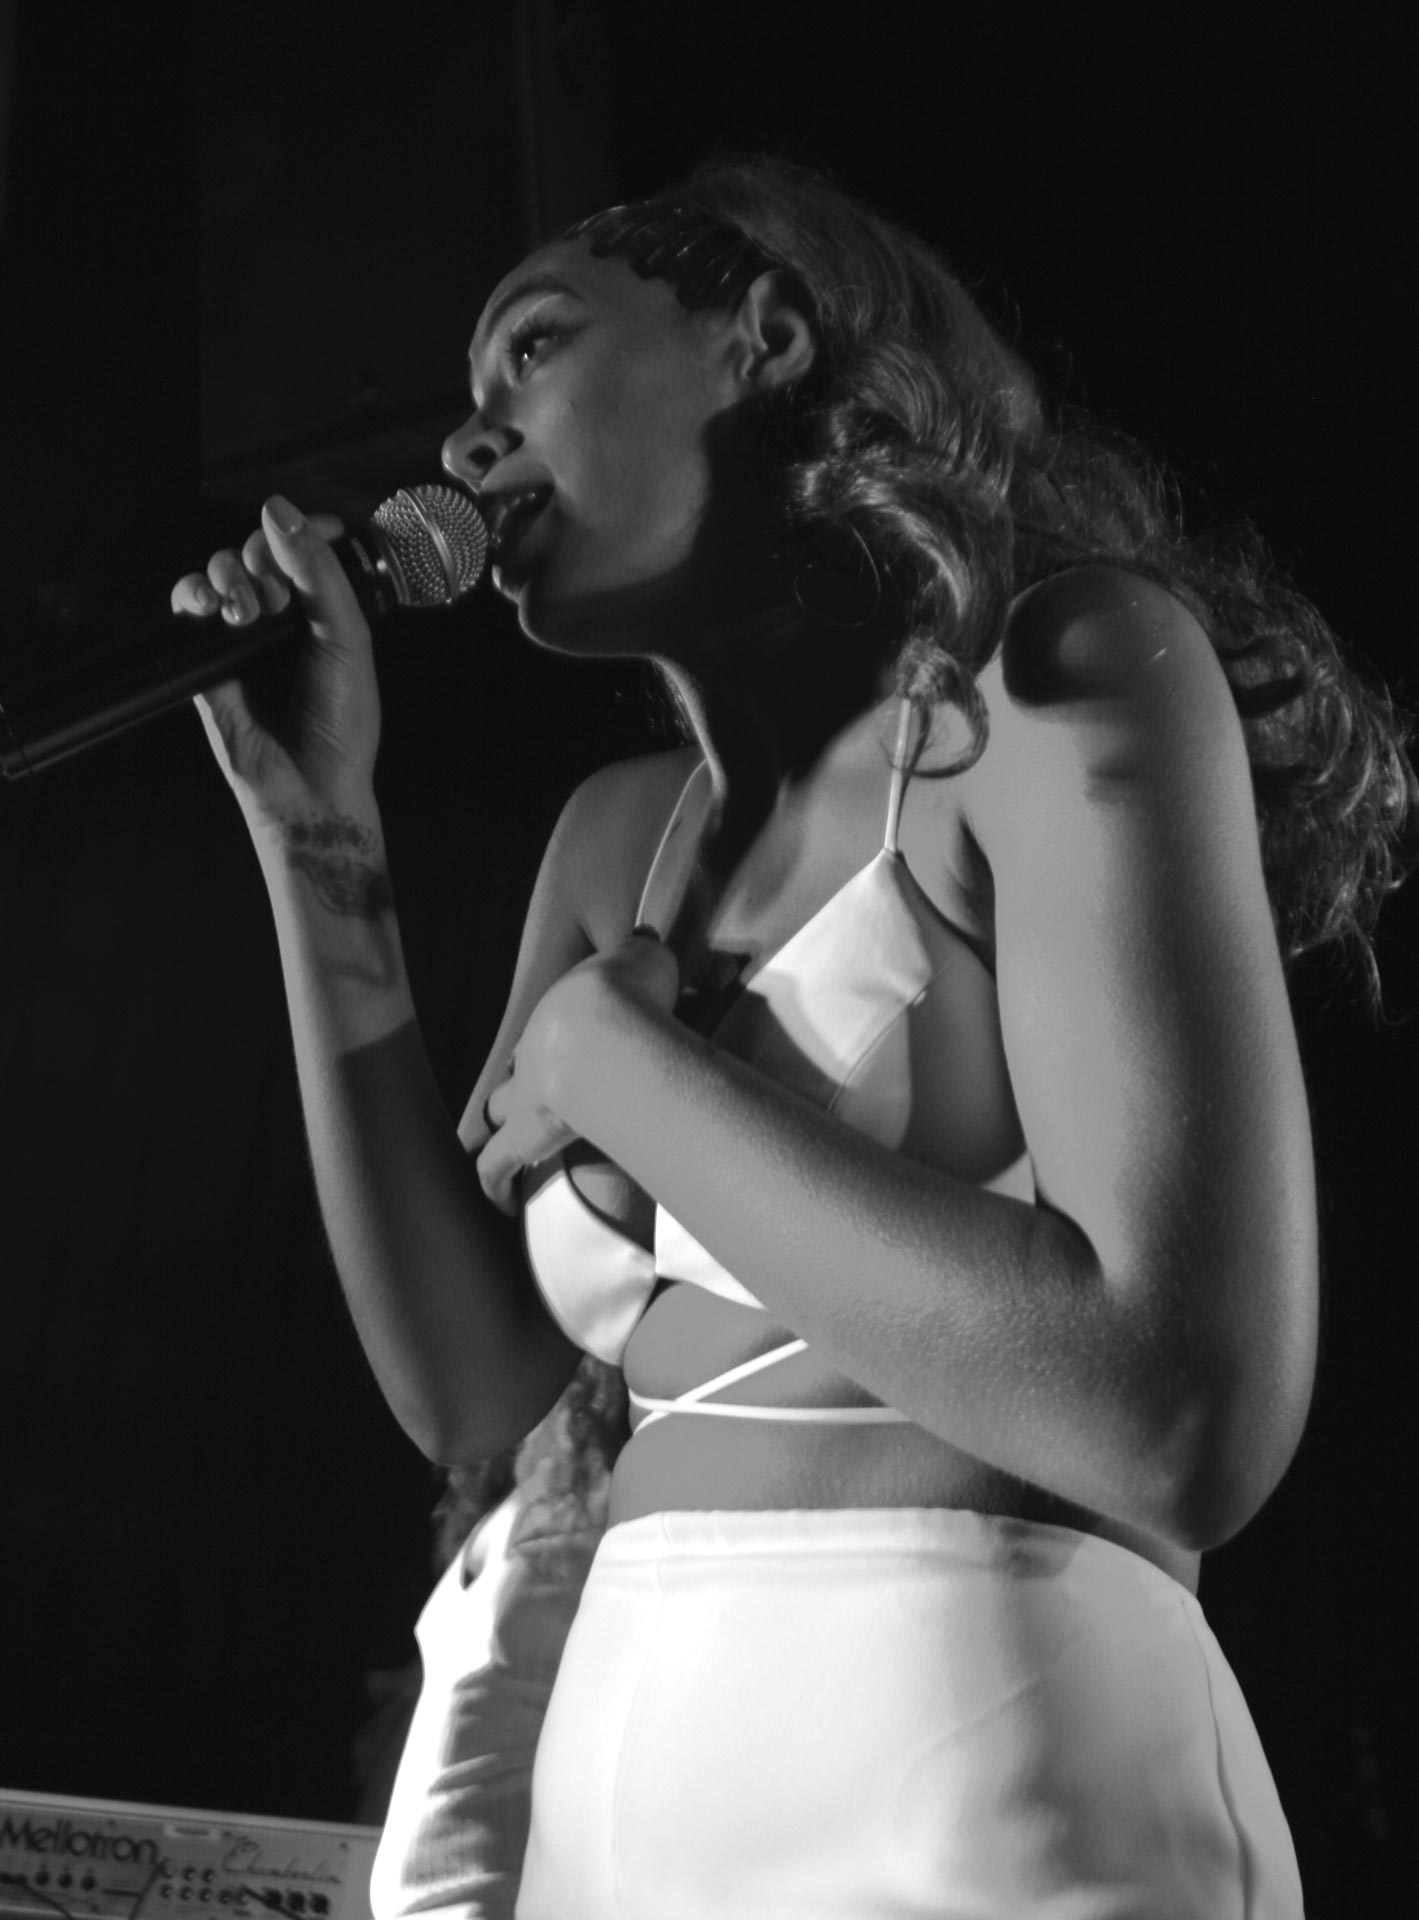 Solange performs at the Starline Social Club in Oakland, Dec. 16, 2016.